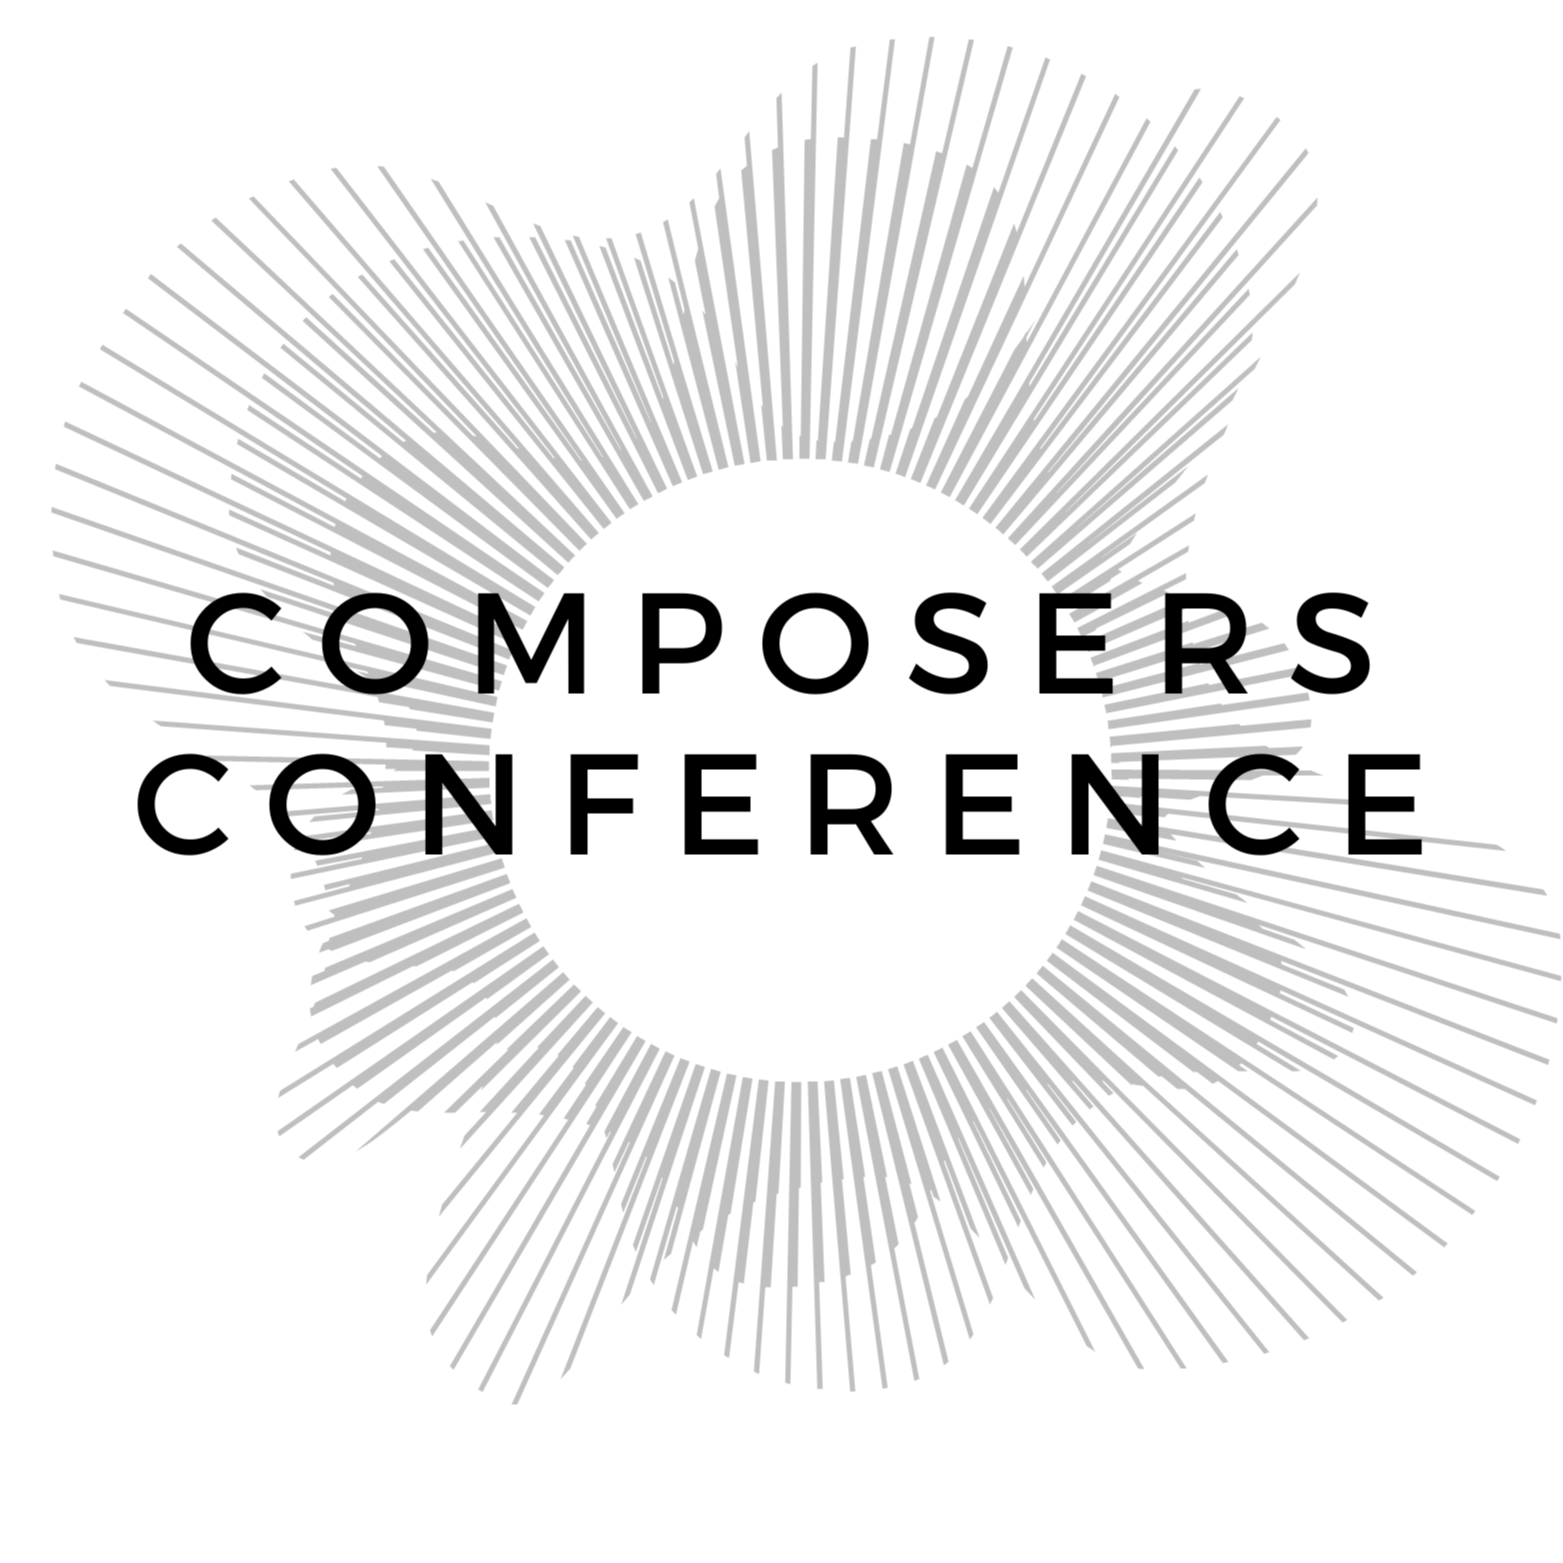 Composers Conference logo